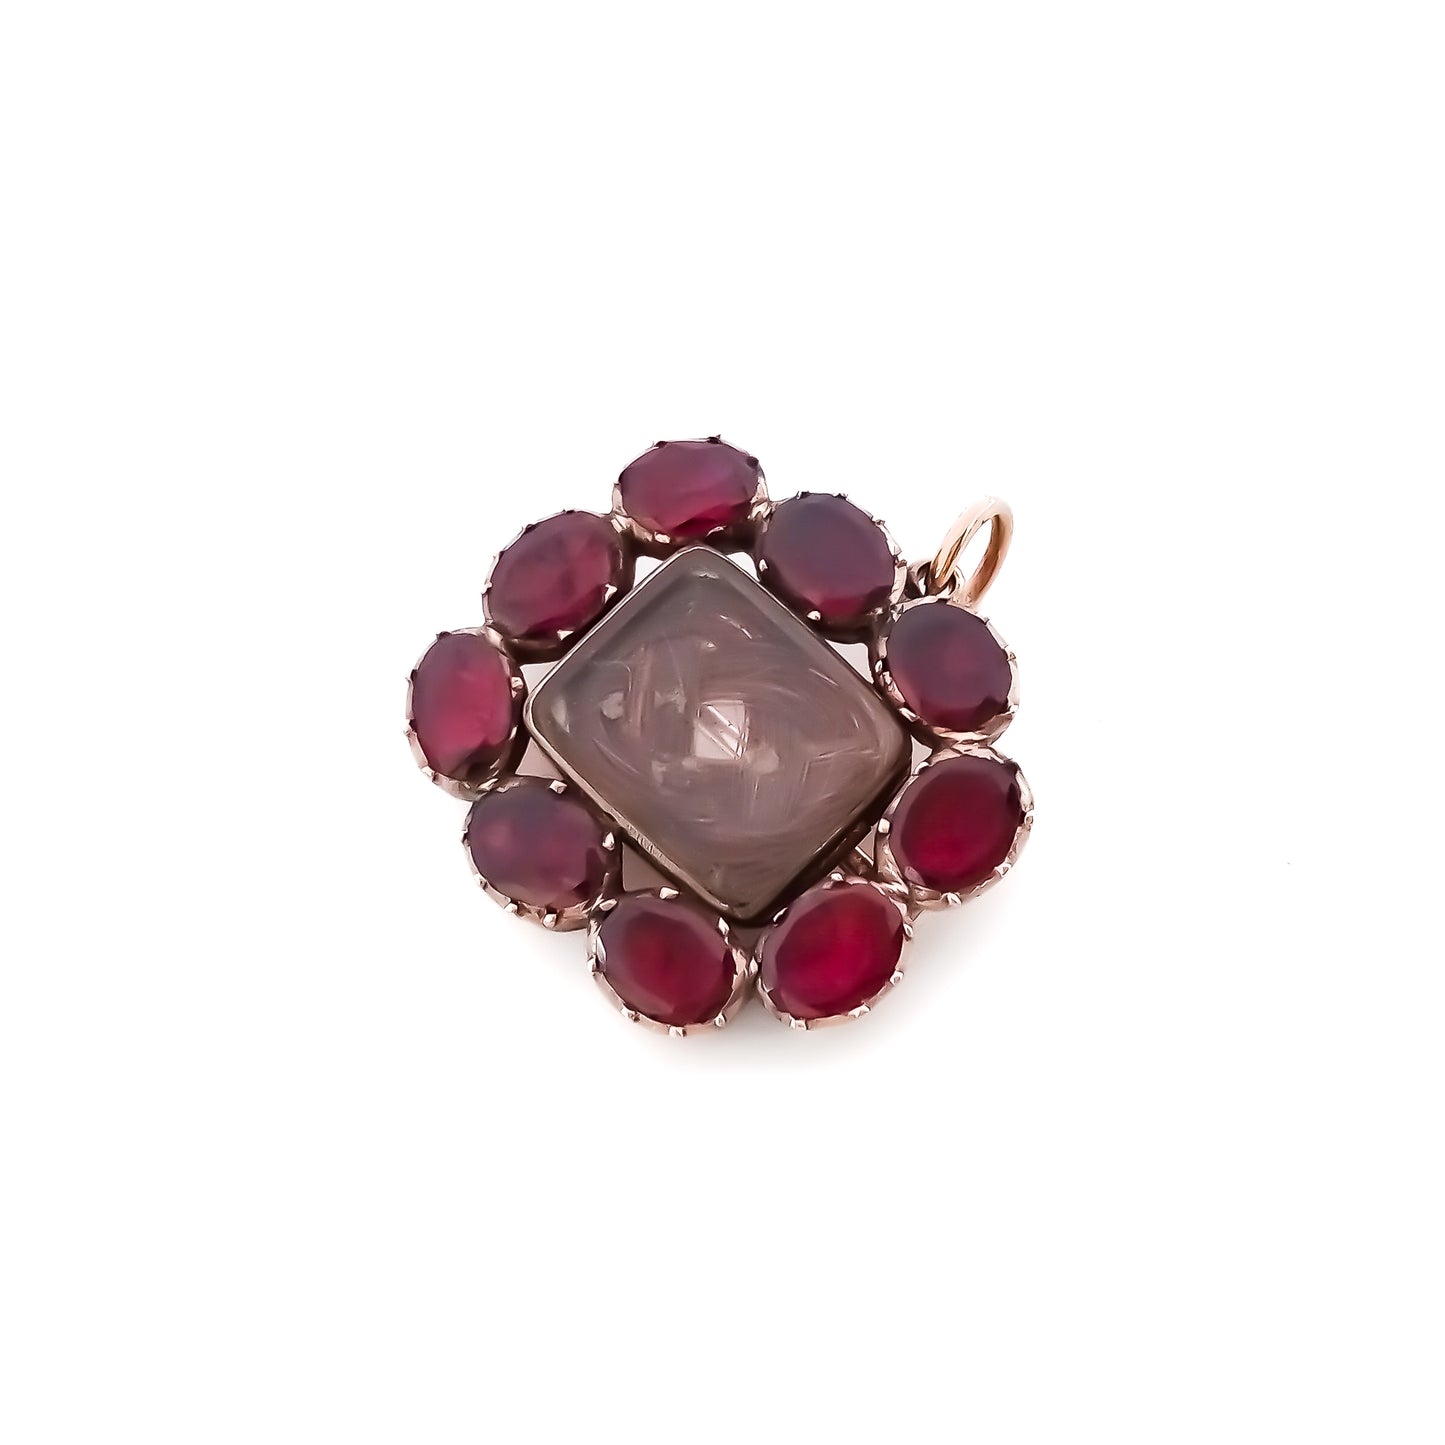 Charming Georgian 9ct rose gold mourning brooch with plaited hair under bevelled glass surrounded by nine Bohemian garnets. 